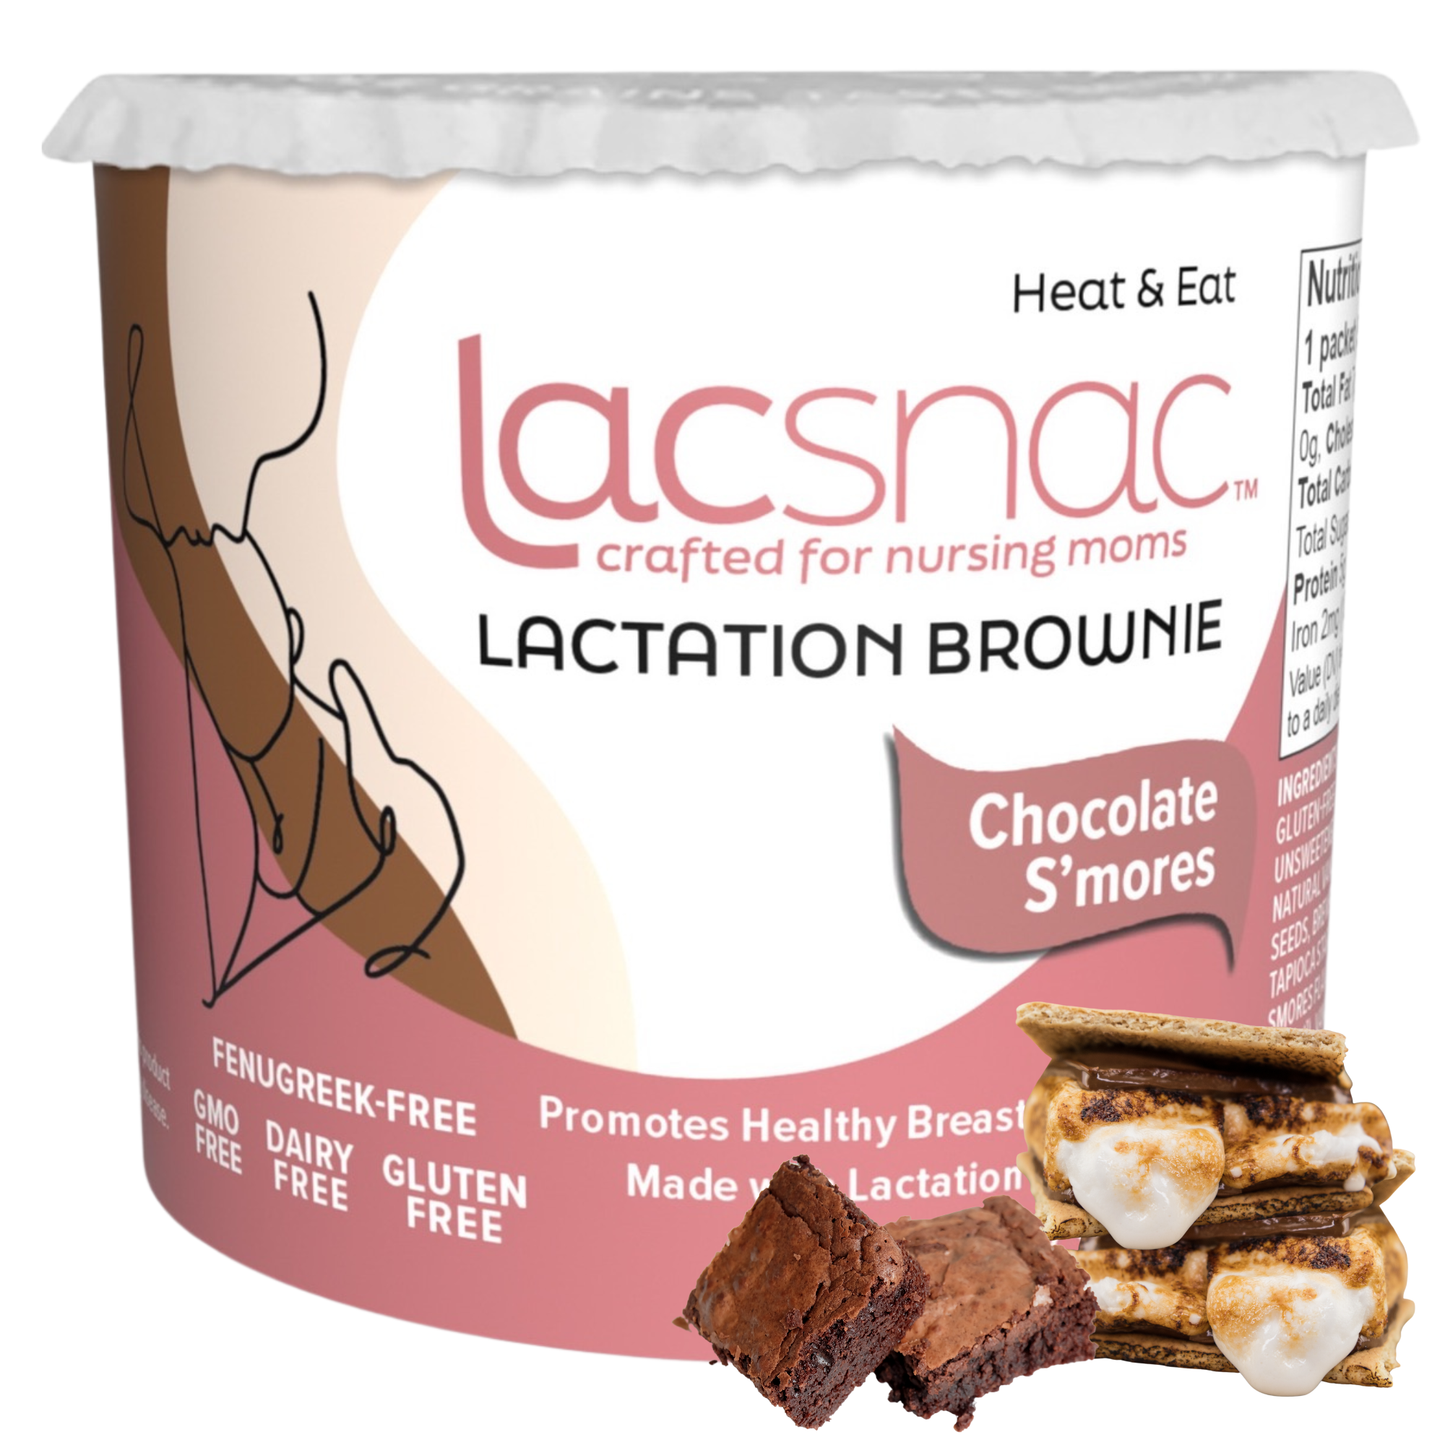 Lacsnac™ Breastfeeding Supplements - Chocolate S'mores Lactation Brownie